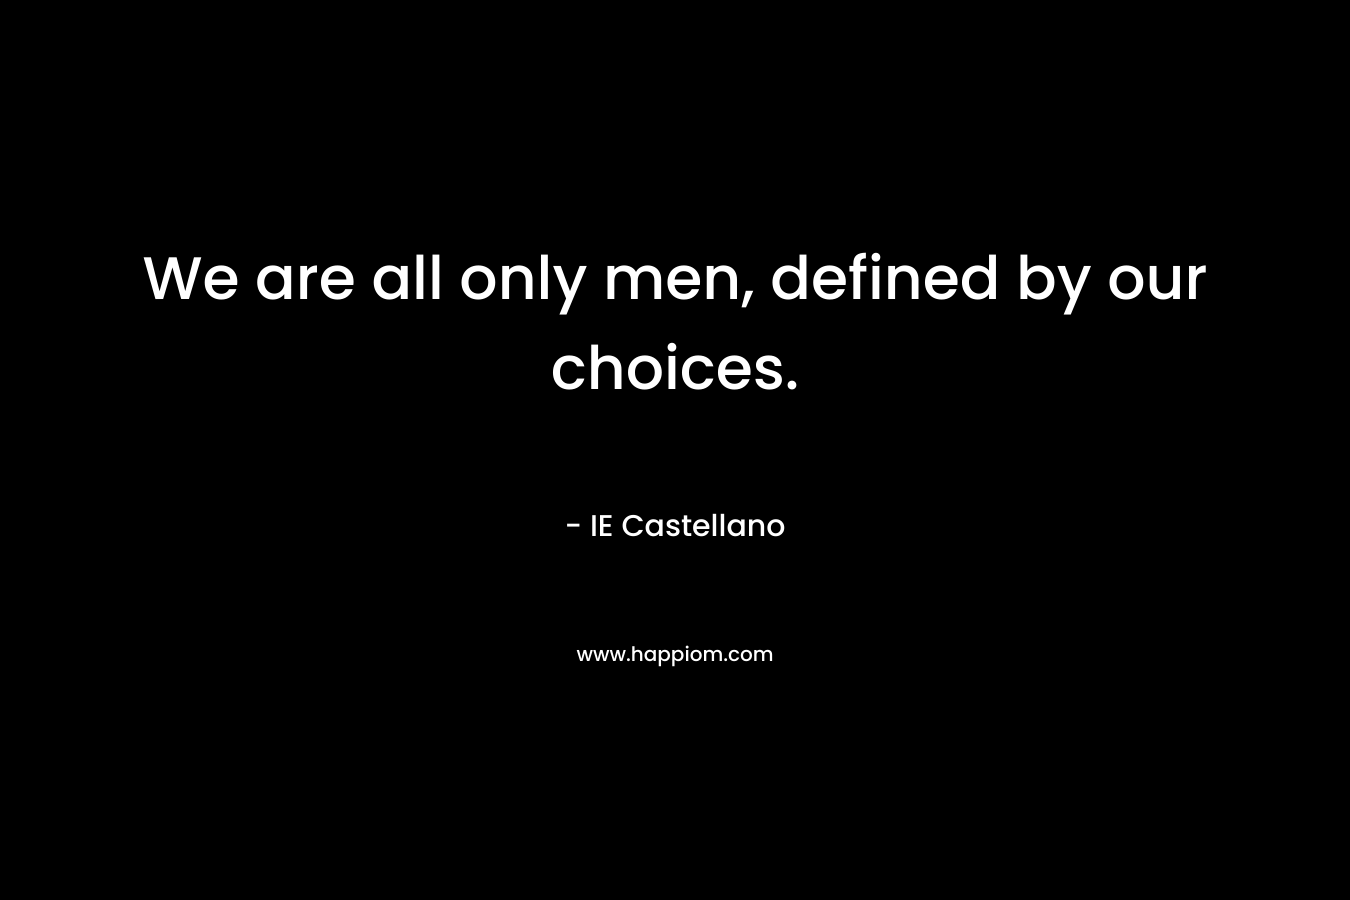 We are all only men, defined by our choices. – IE Castellano